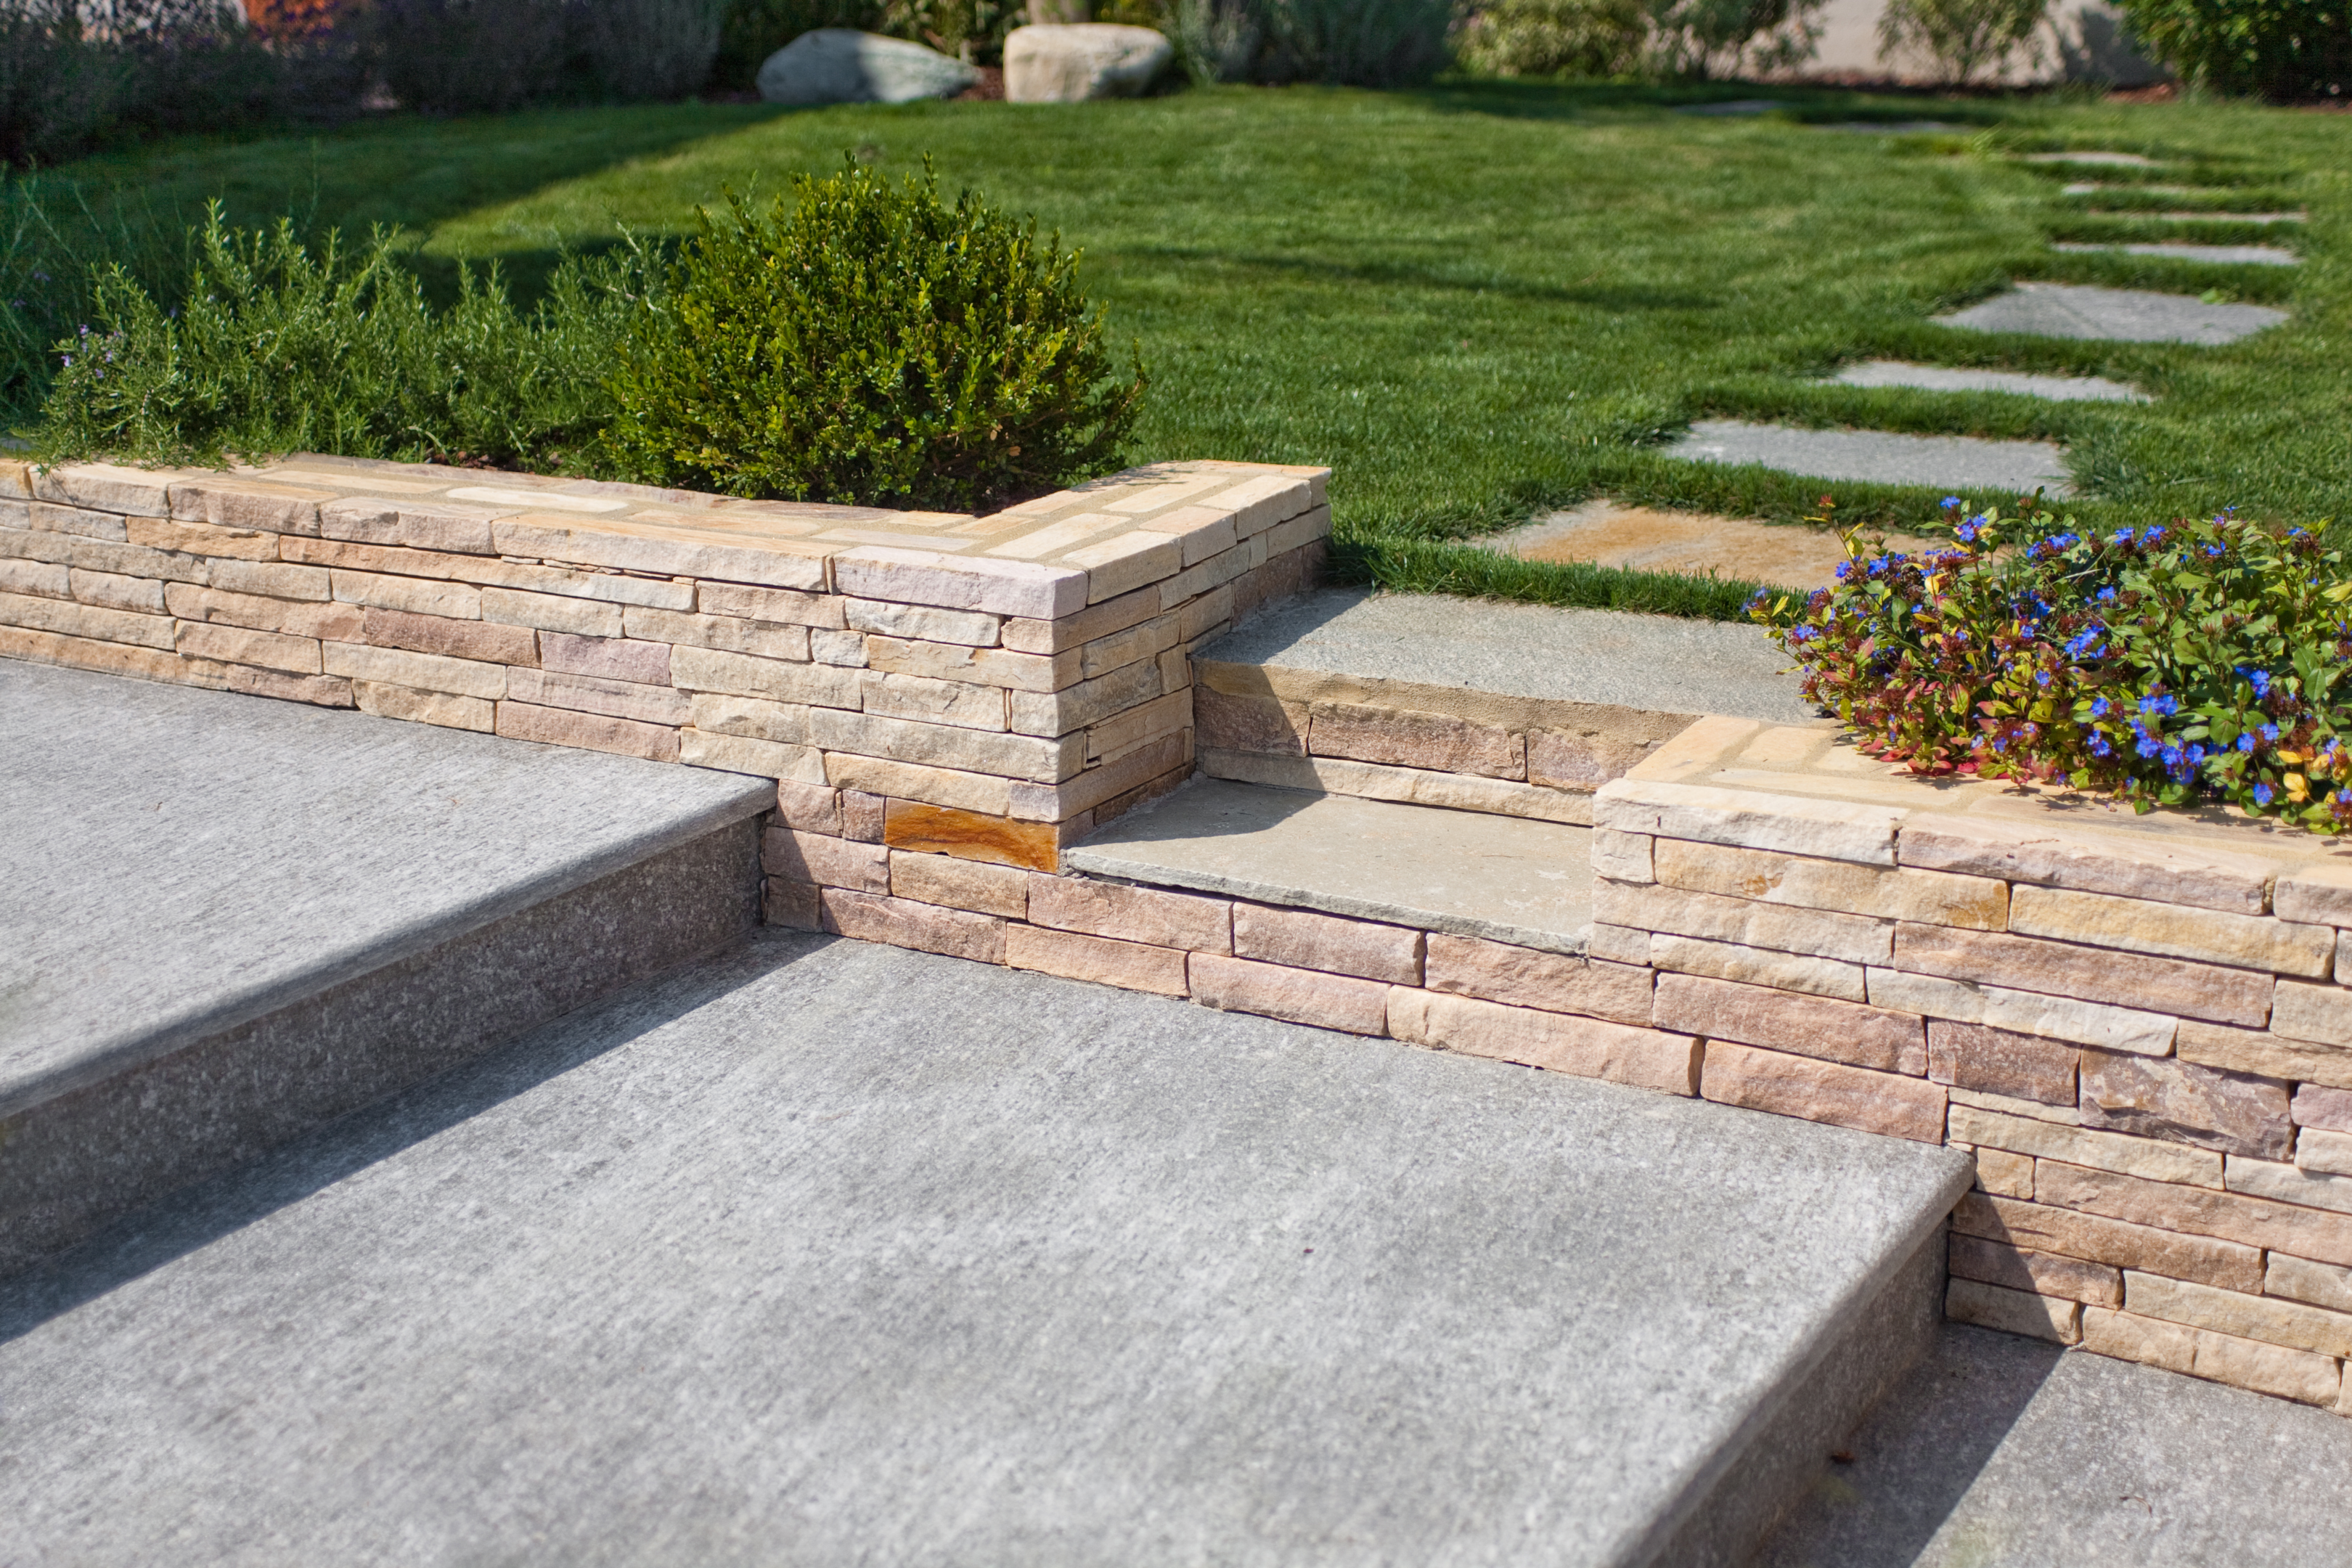 The stone separates the yard from the patio area 